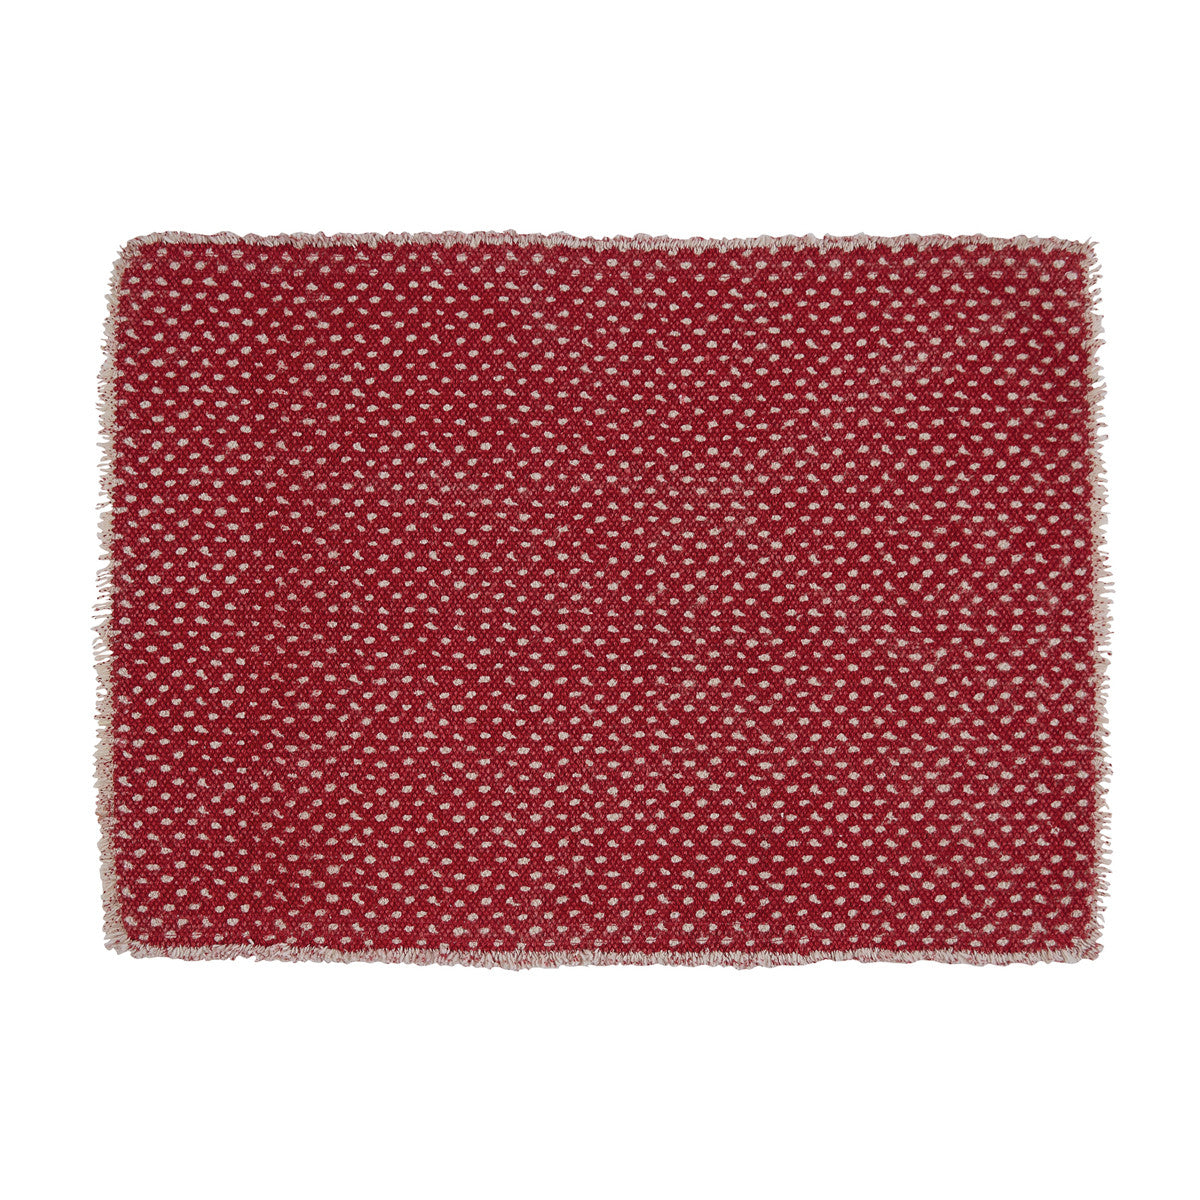 Mini Dots Print Placemat - Red